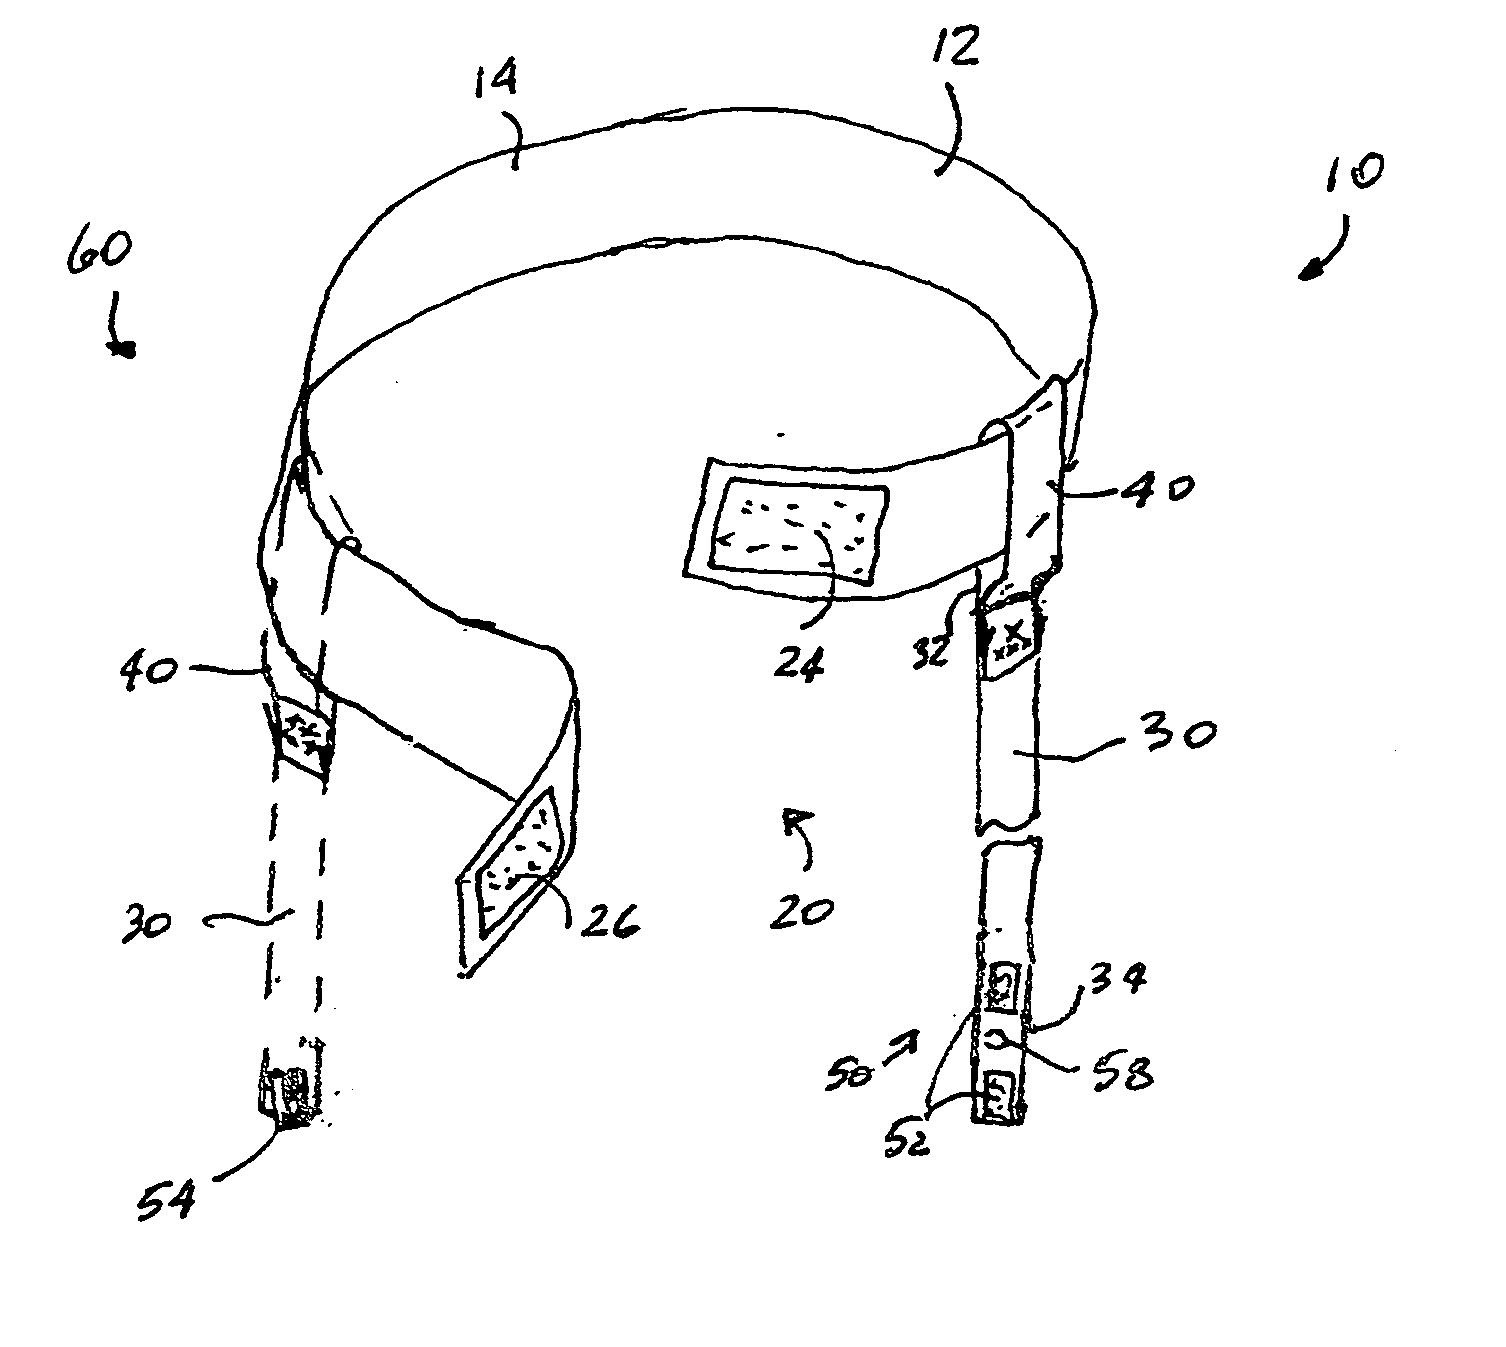 Device for preventing loss of a foot covering